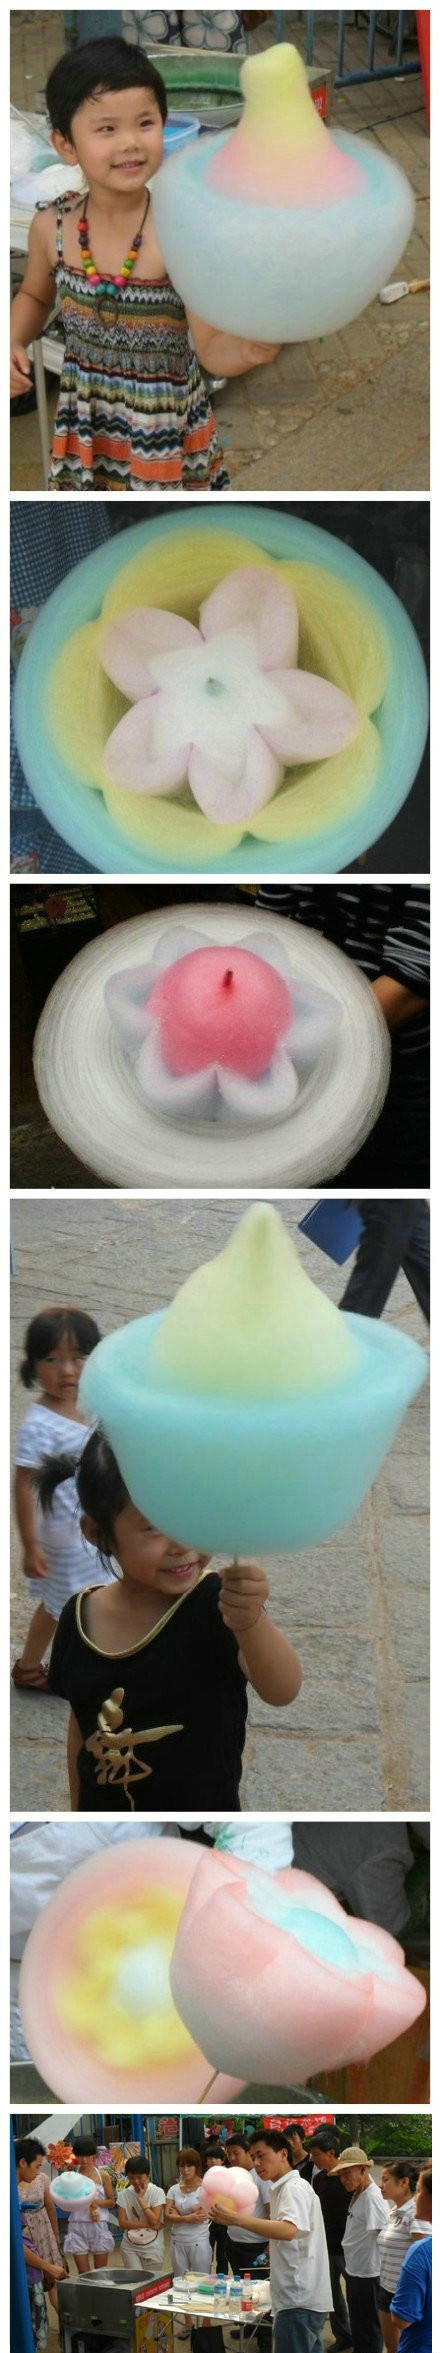 leave it to the asians to turn cotton candy into an art form